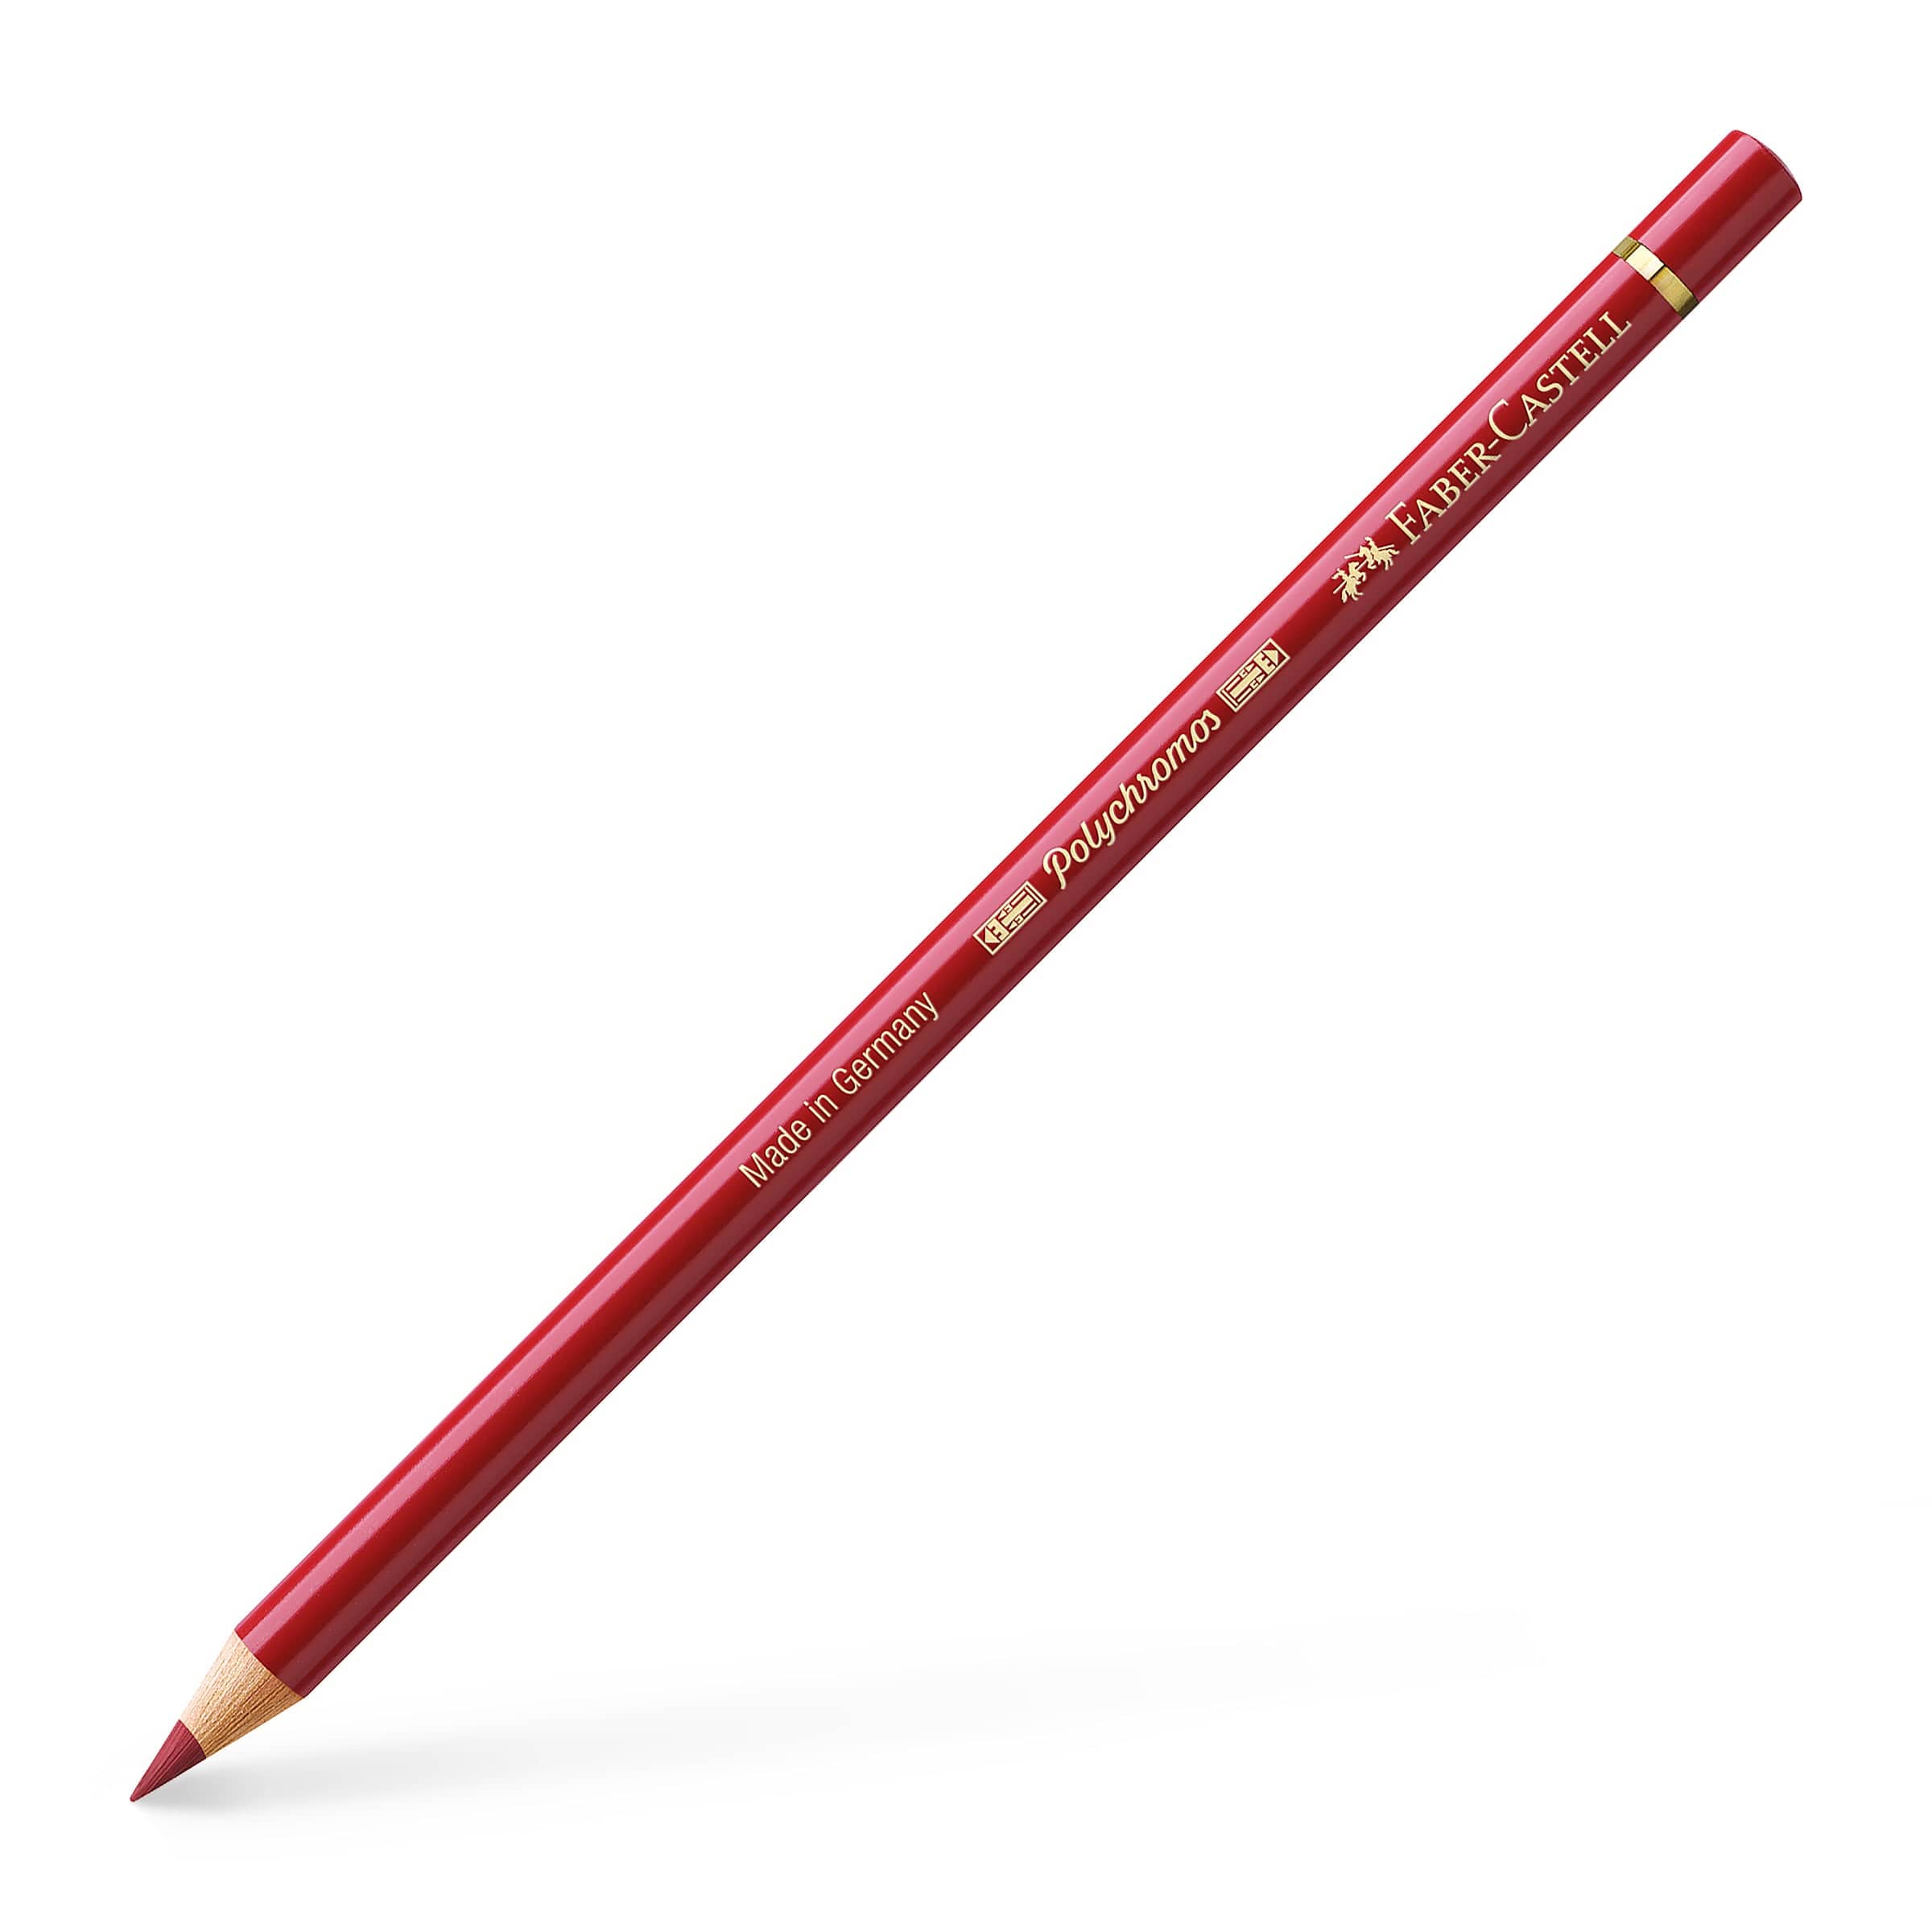 Faber-Castell Polychromos Middle cadmium red 217